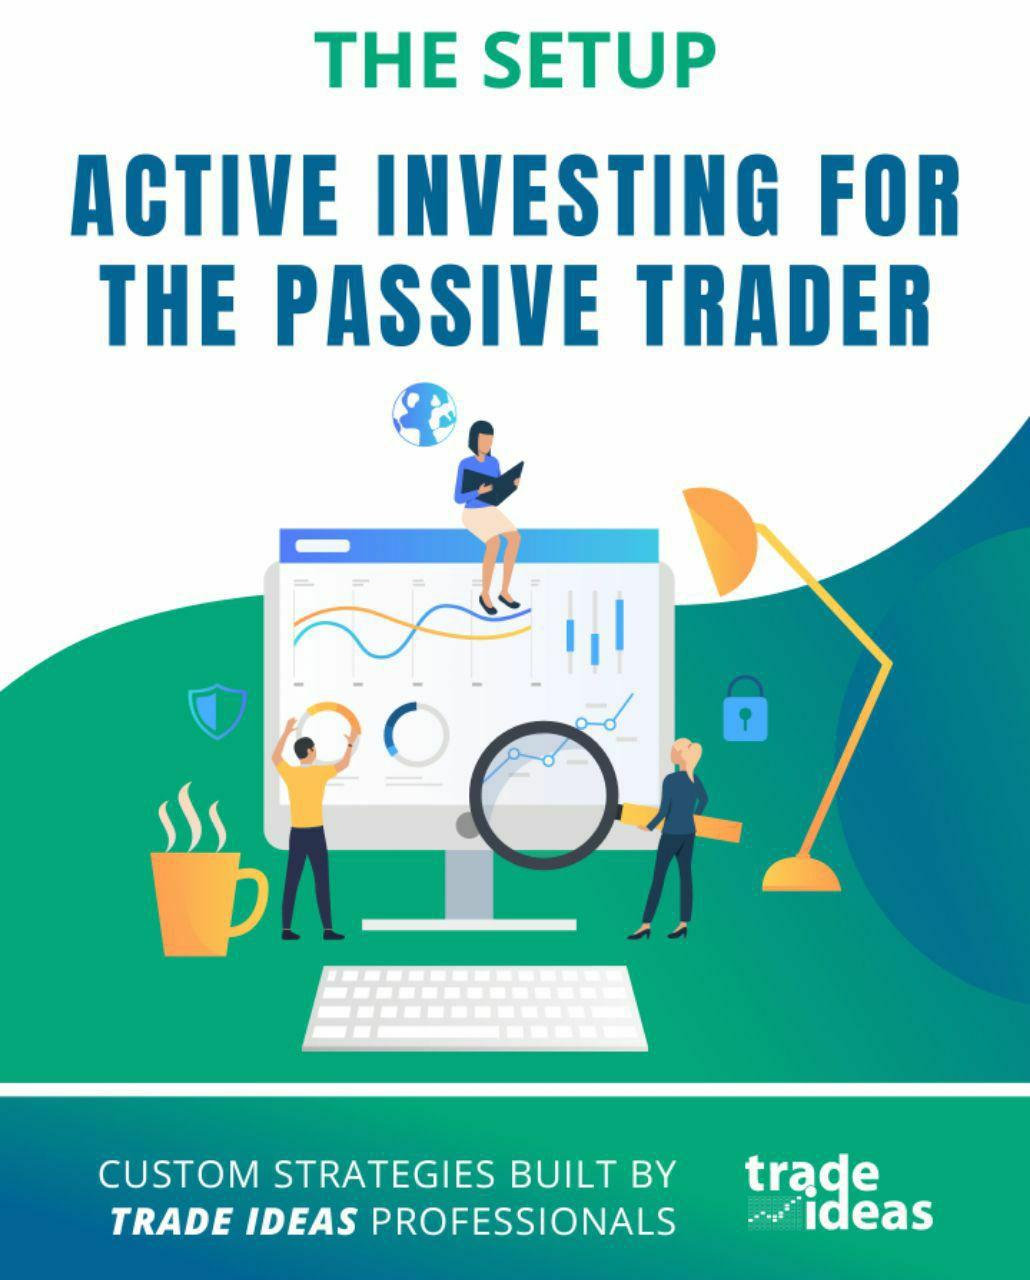 ACTIVE INVESTING FOR THE PASSIVE TRADER